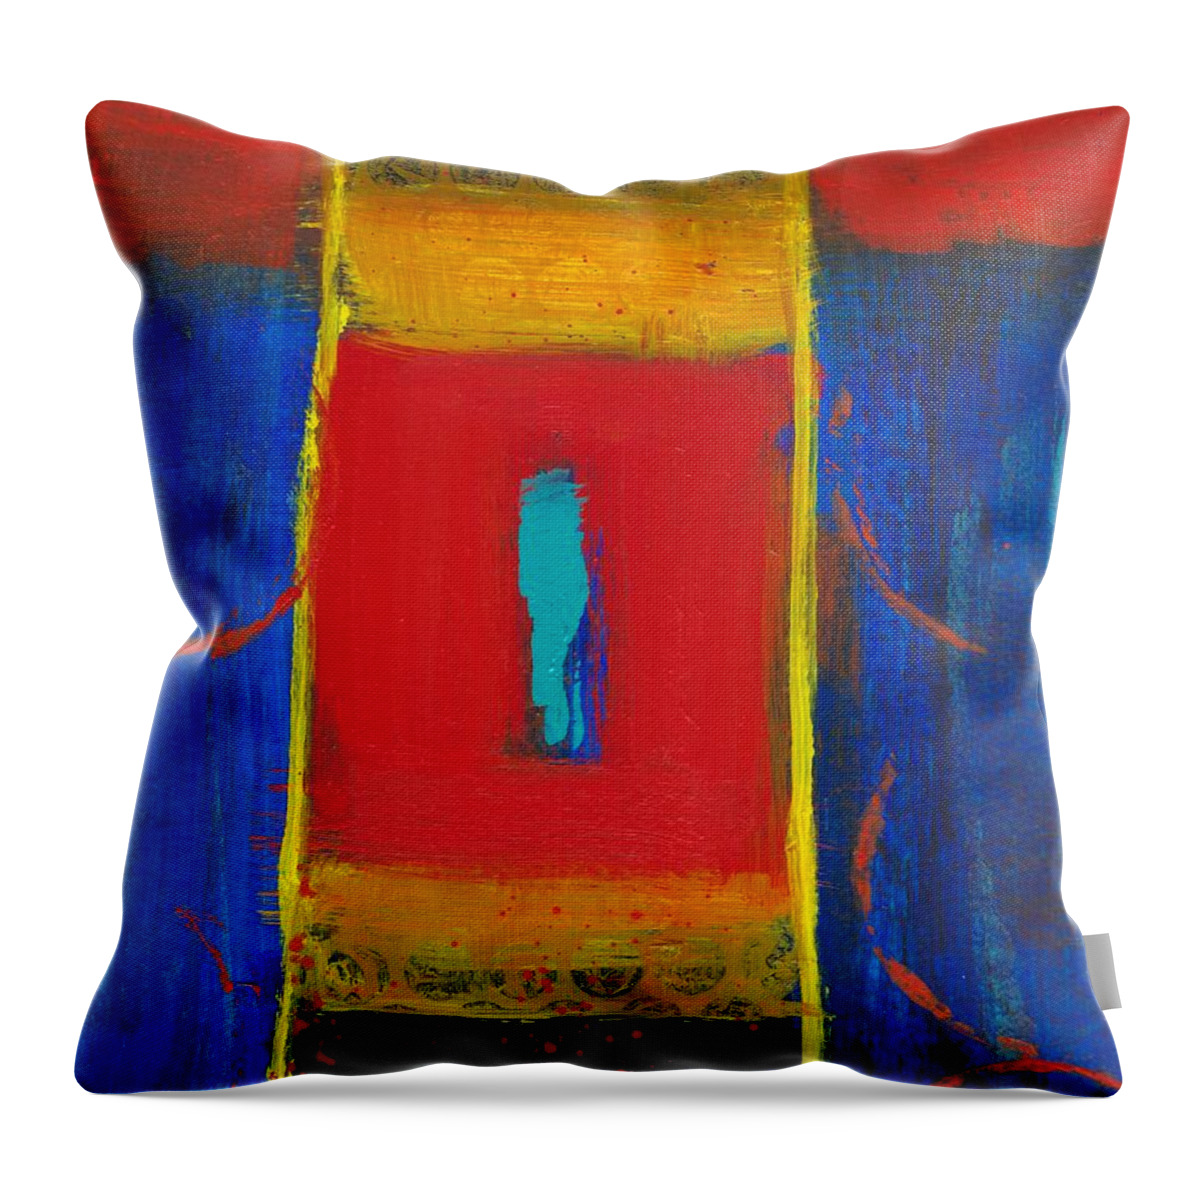 Day 25 Celebration Throw Pillow featuring the painting Celebration by Bill Tomsa